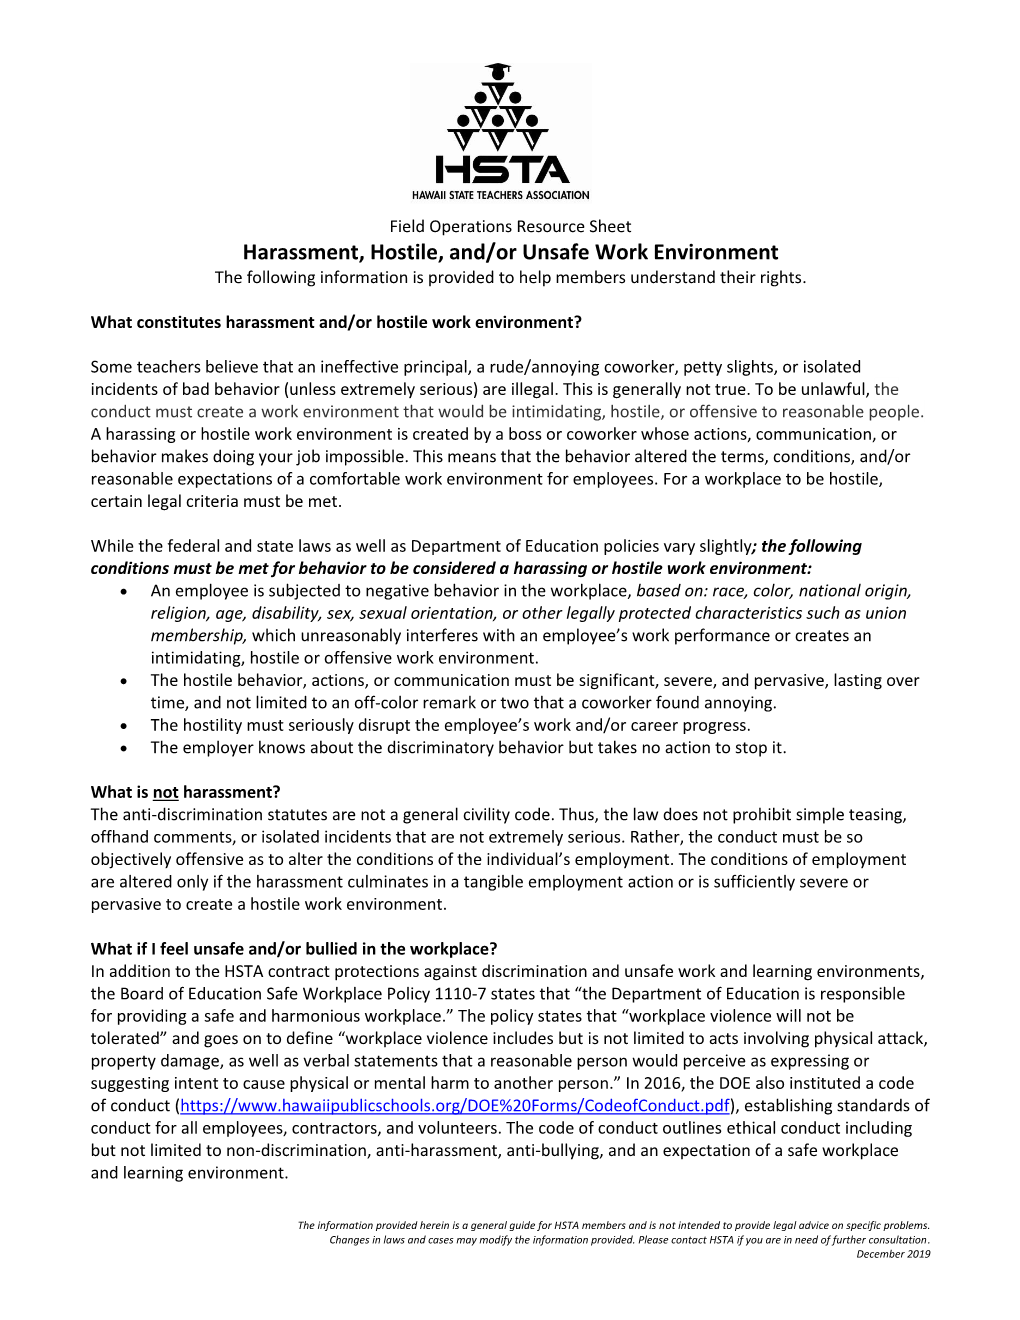 Harassment, Hostile, And/Or Unsafe Work Environment the Following Information Is Provided to Help Members Understand Their Rights